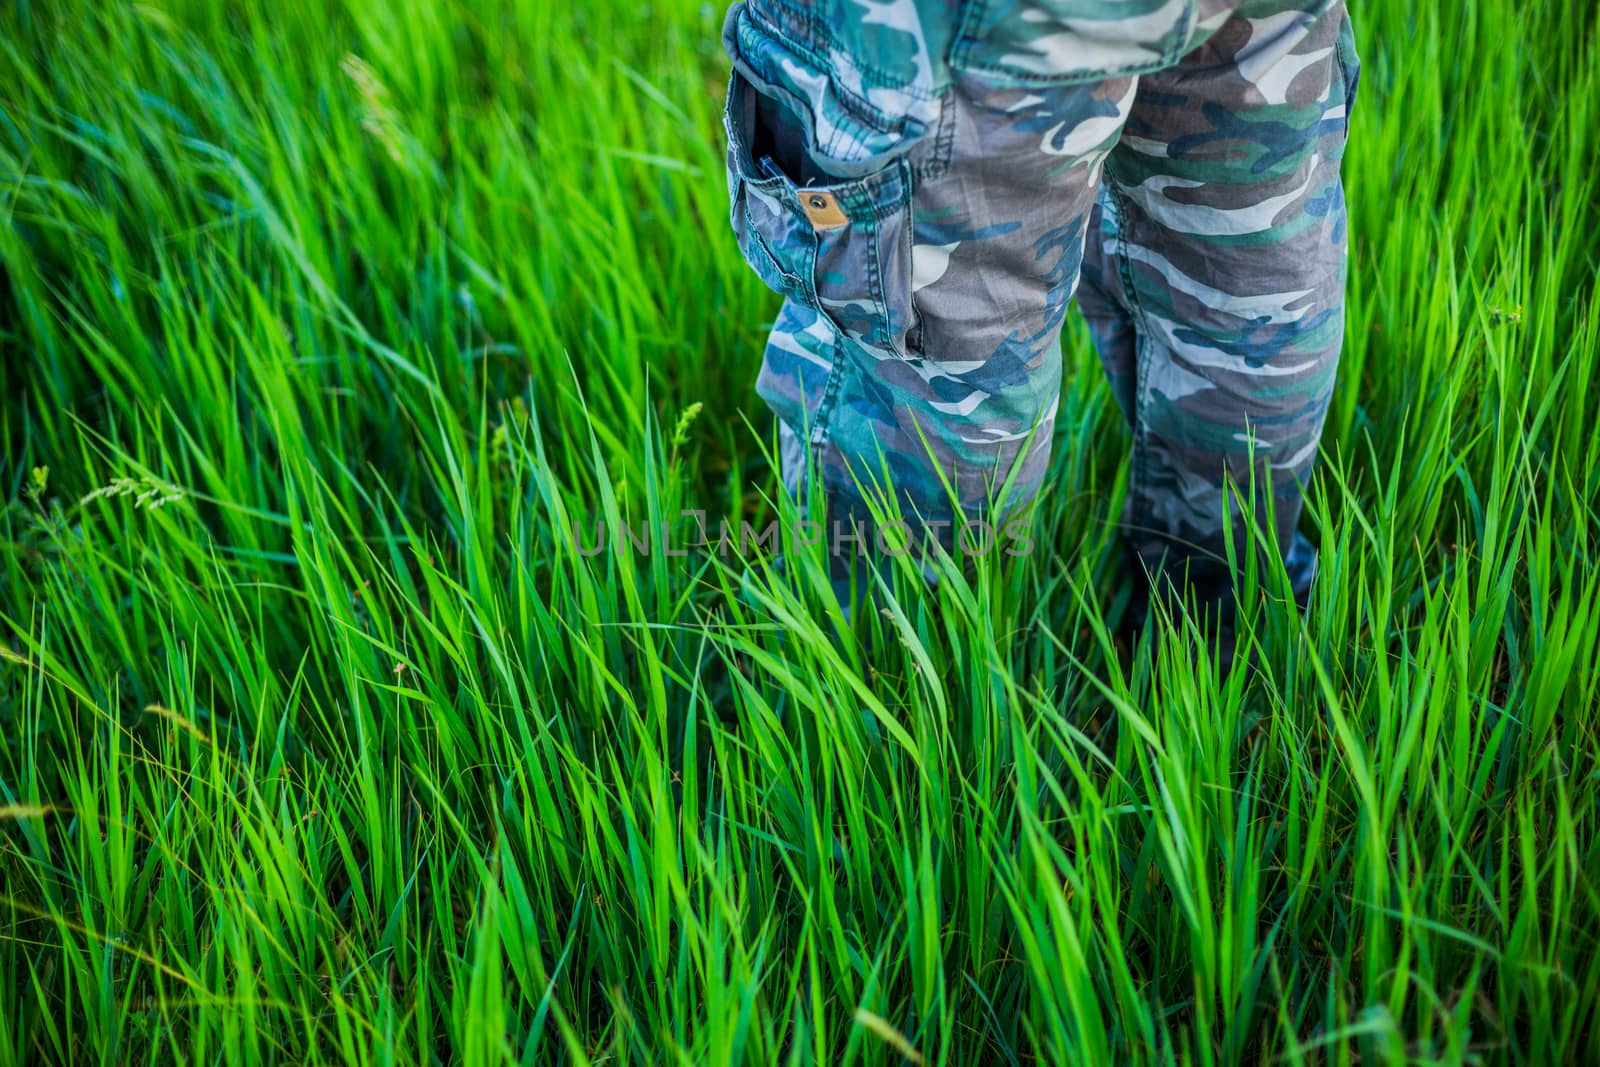 legs in woodland camouflage denim trousers in tall grass with selective focus